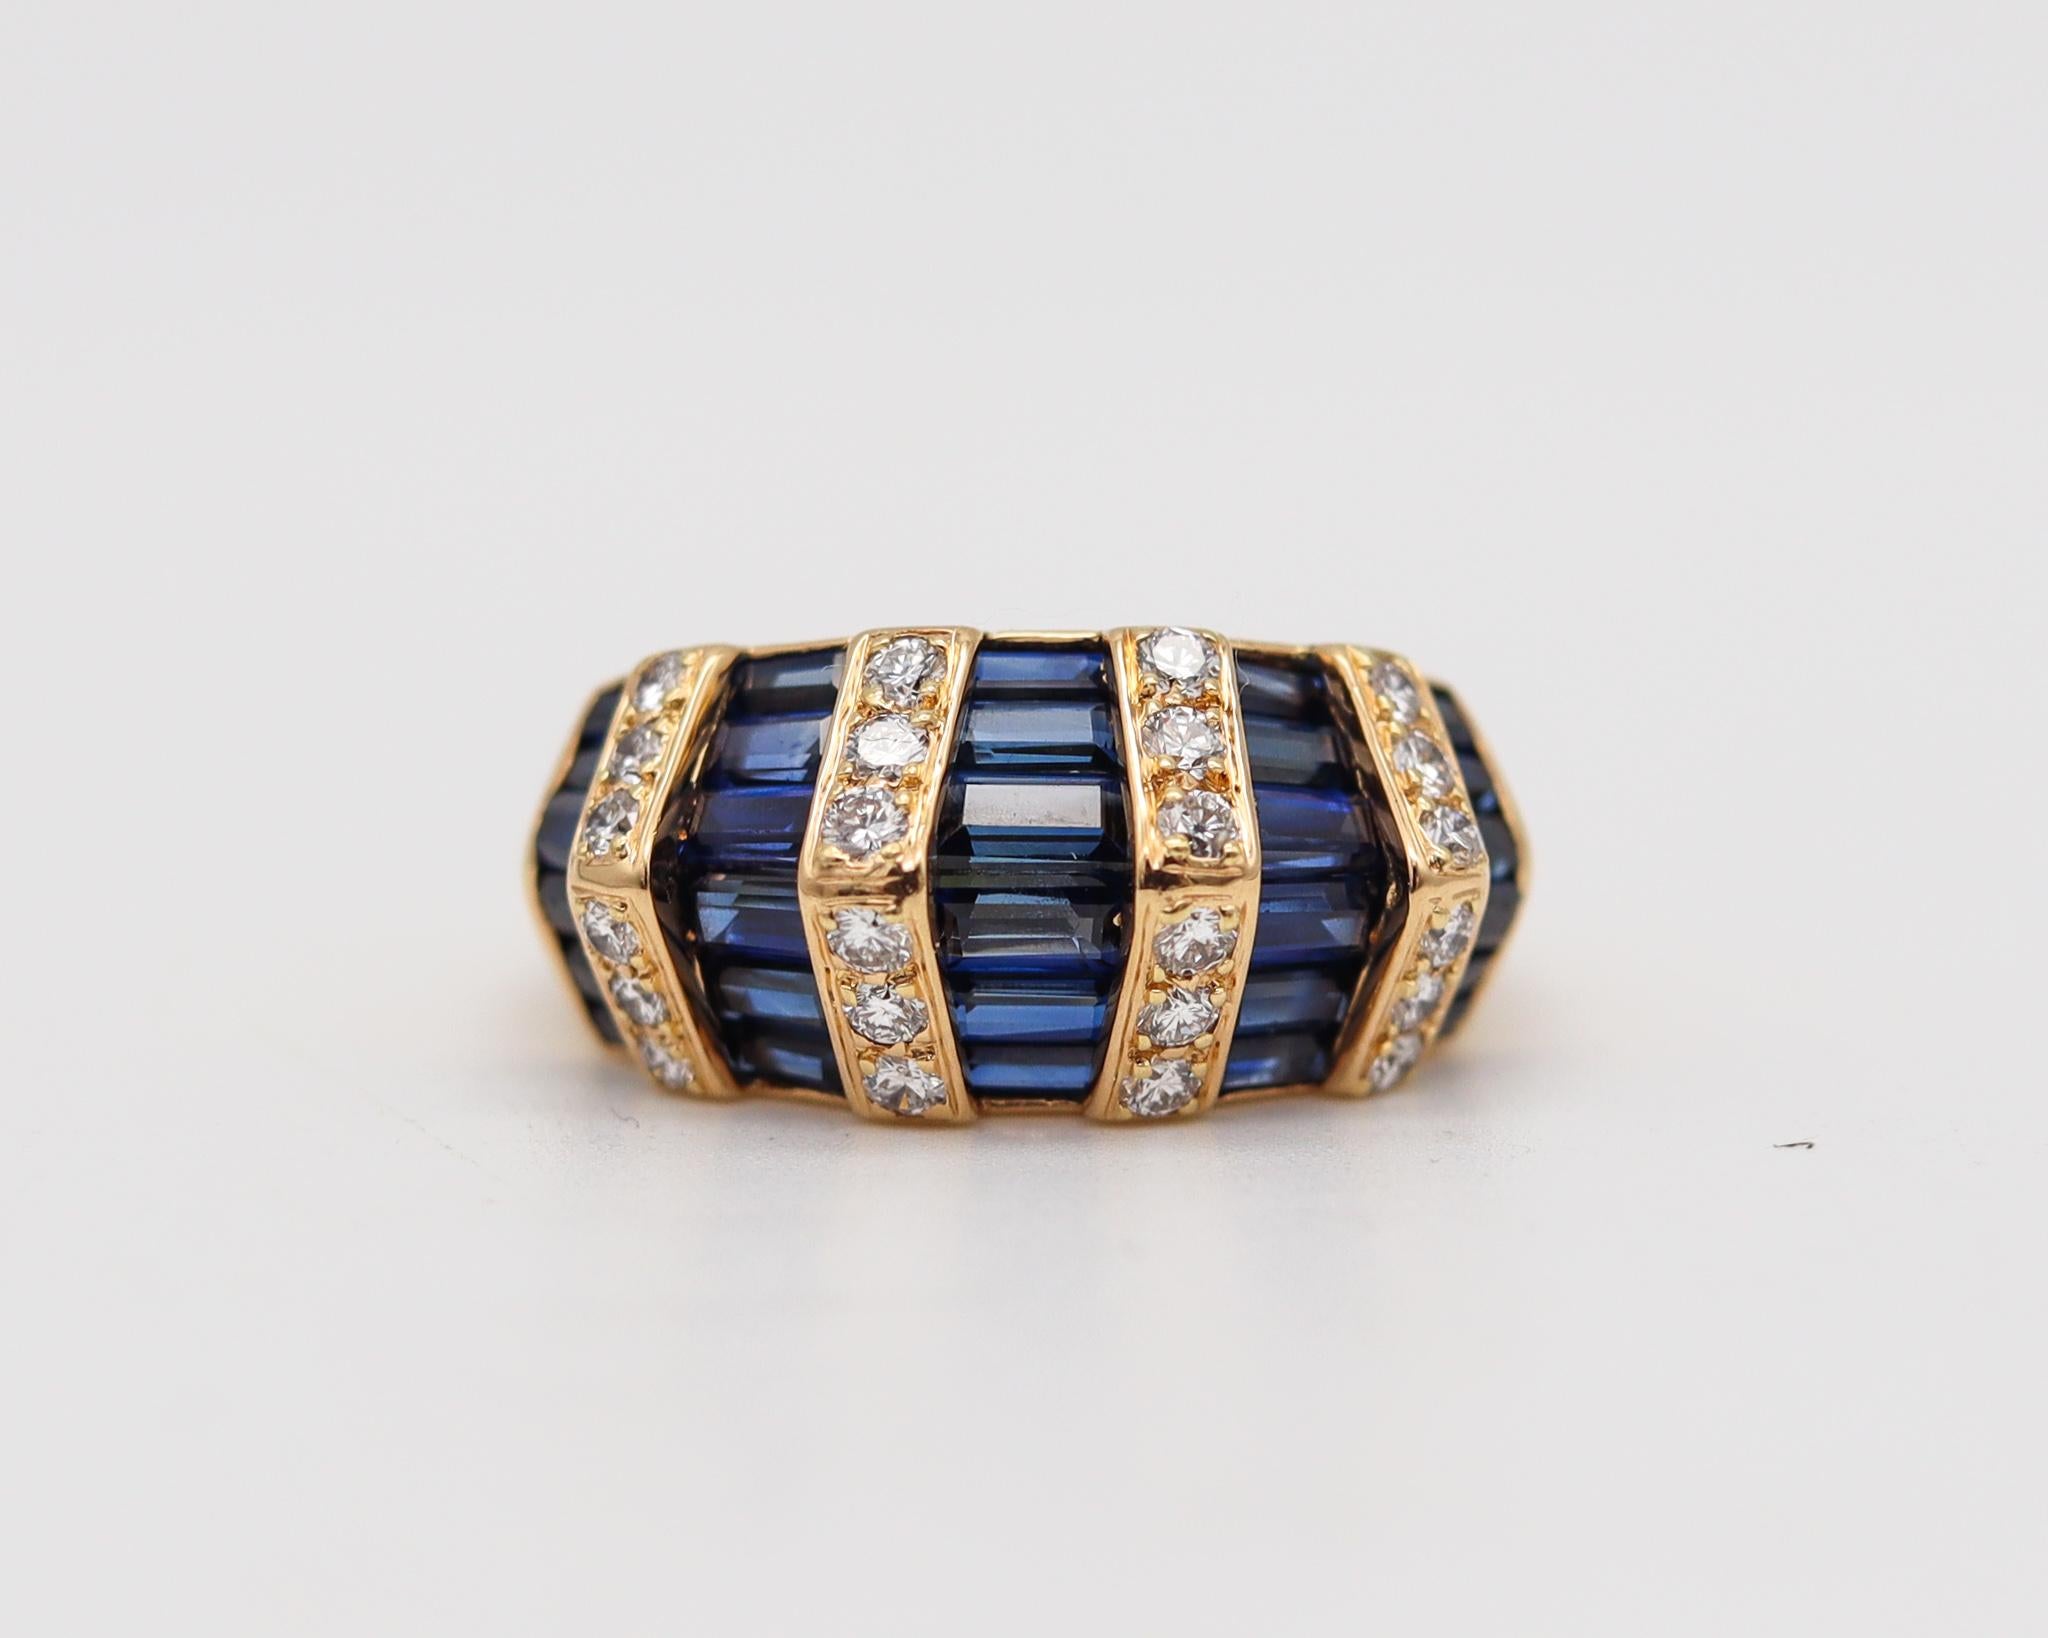 A ring designed by Oscar Heyman & Brothers.

Beautiful ring, created in New York city by the iconic jewelry makers of Oscar Heyman Company. This ring has been crafted with geometric patterns in solid yellow gold of 18 karats with high polished